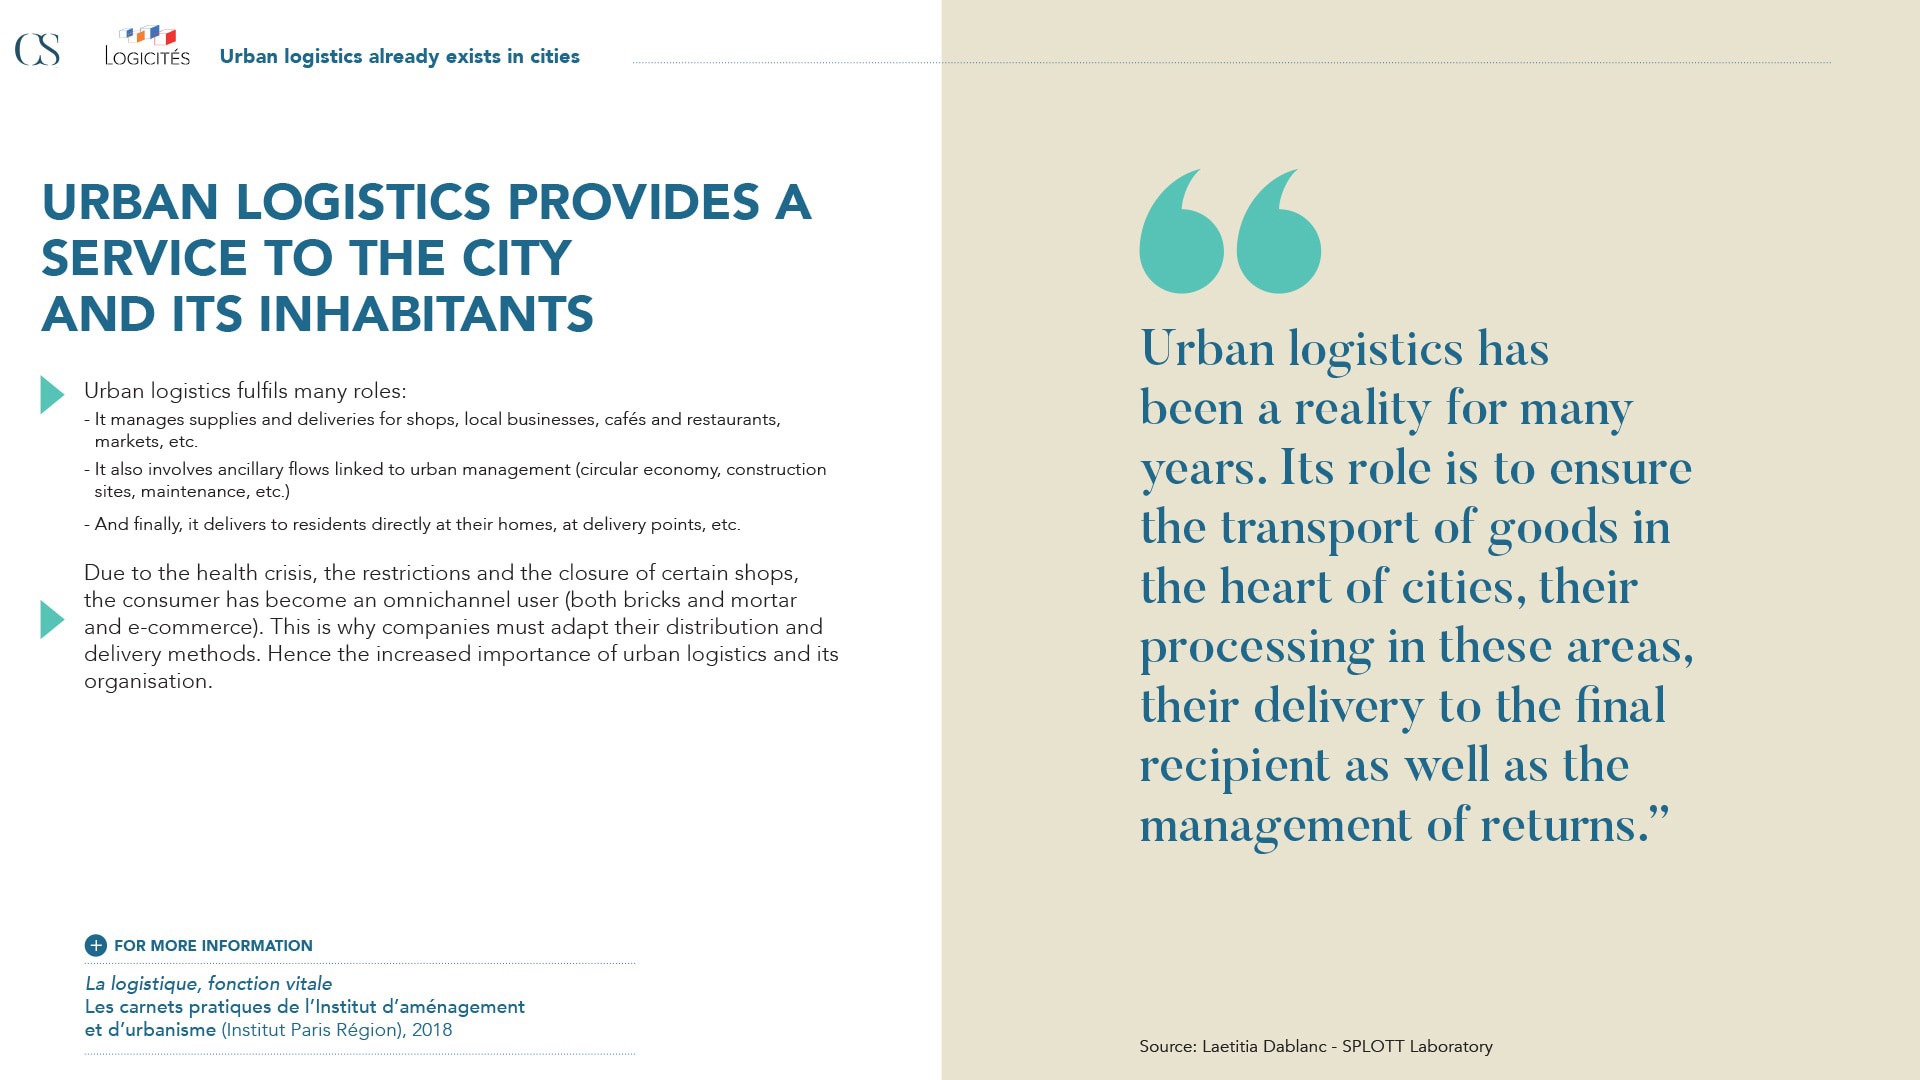 Urban logistics provides a service to the city and its inhabitants